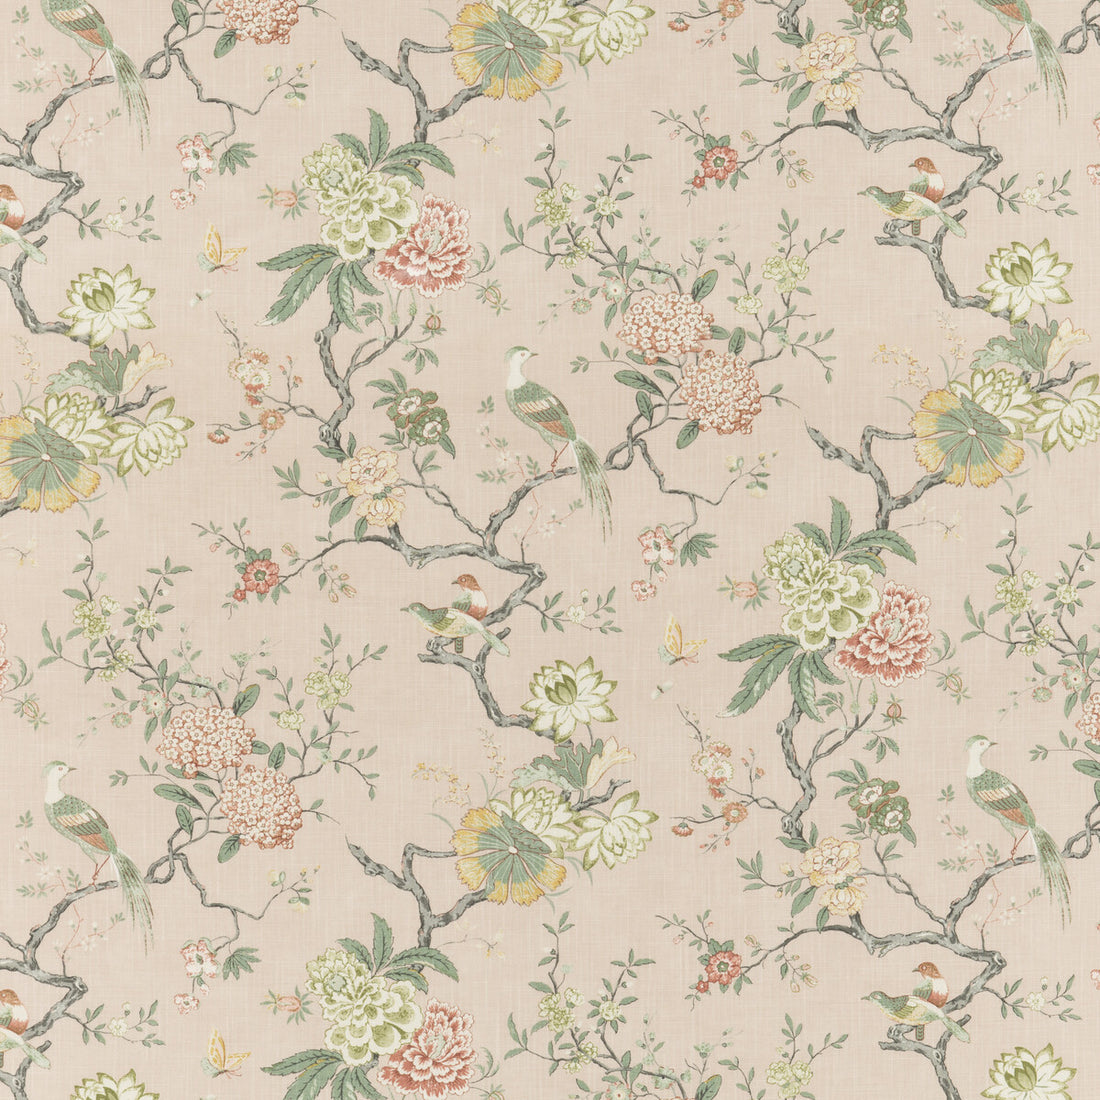 Oriental Bird Signature fabric in blush color - pattern BP10771.1.0 - by G P &amp; J Baker in the Signature Prints collection